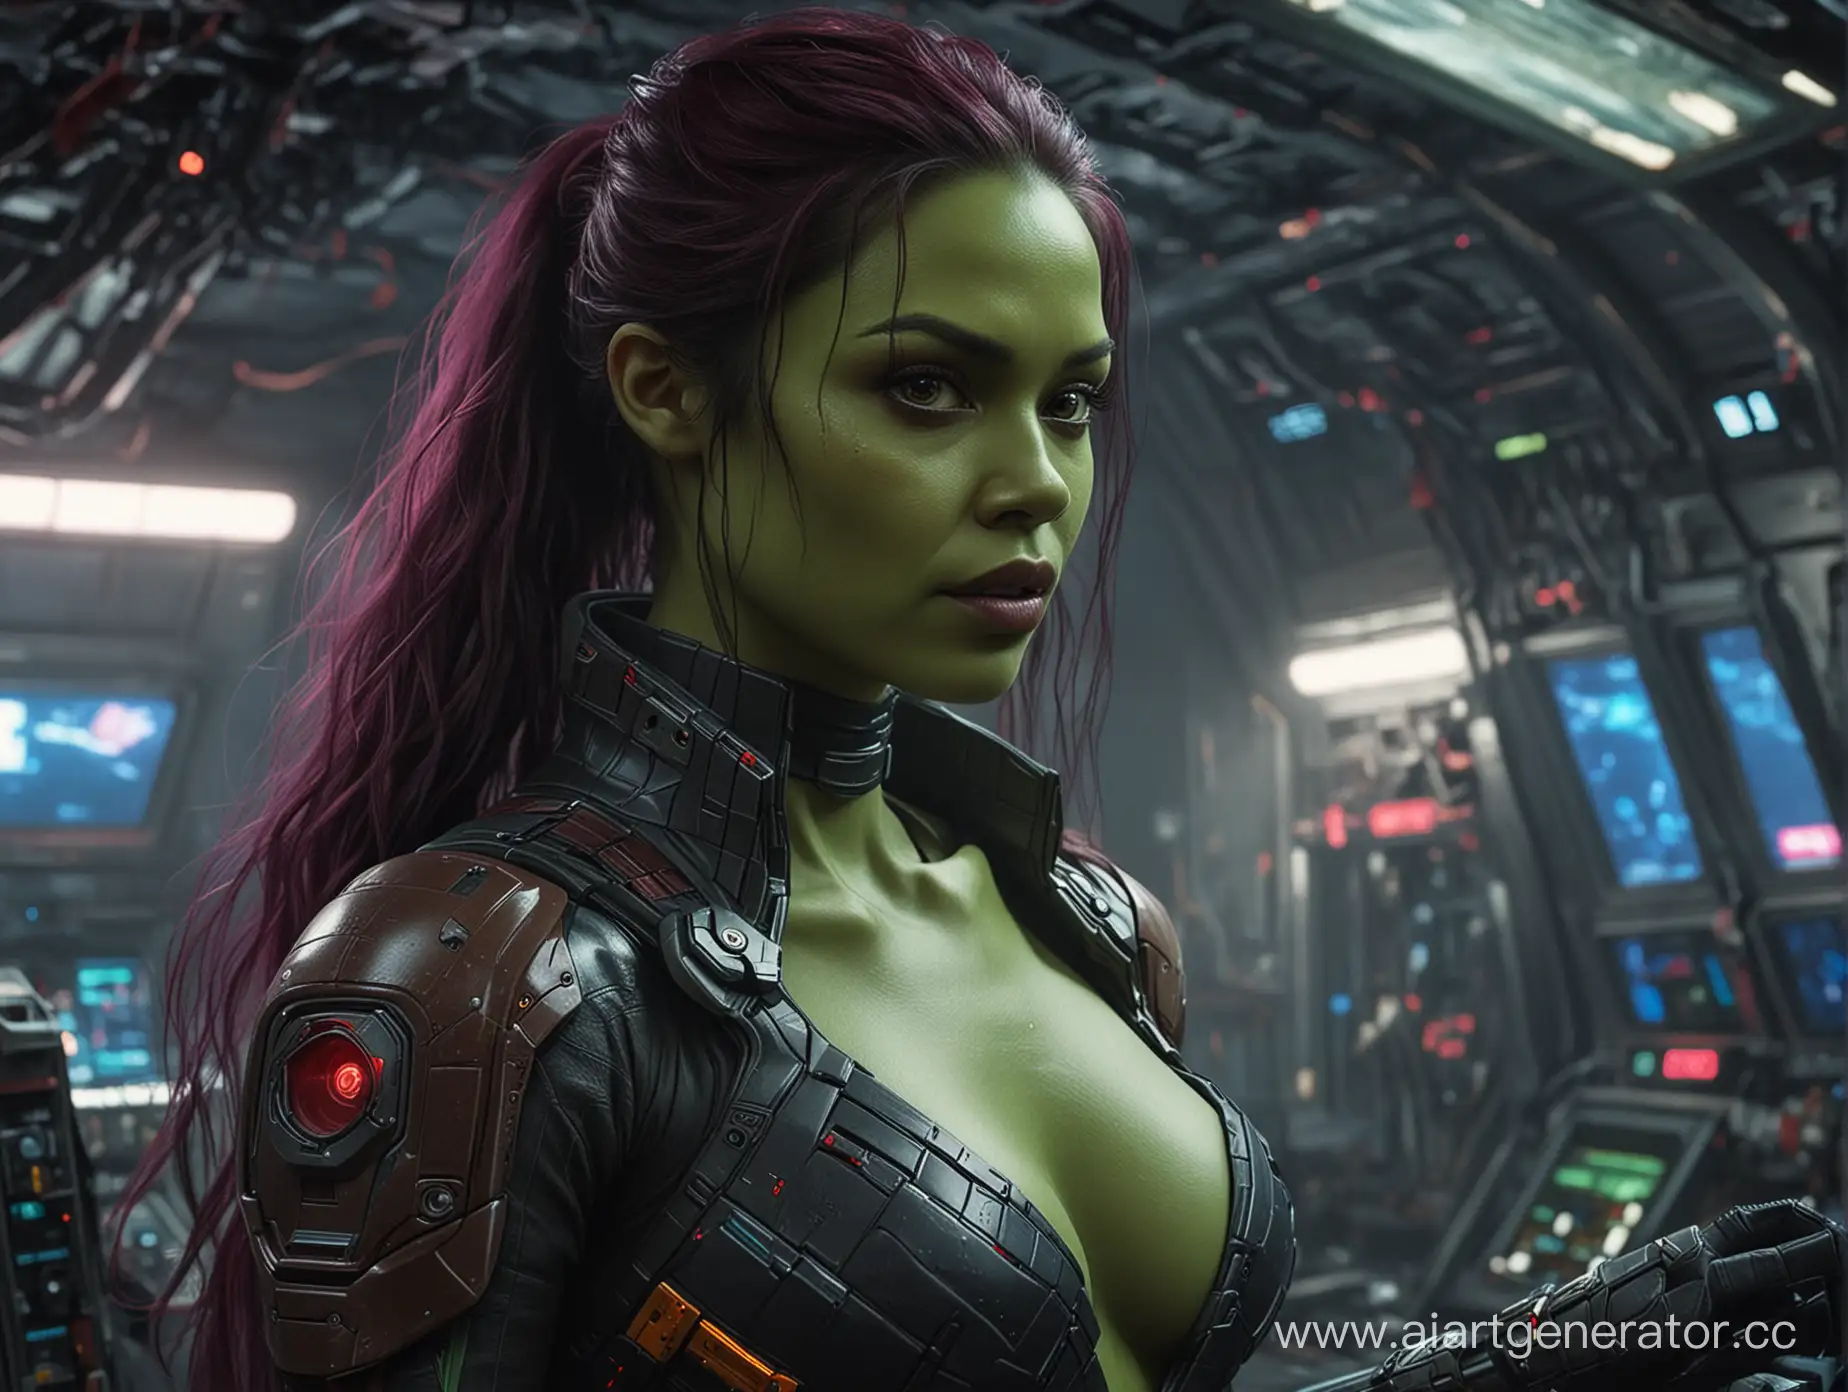 Naked Gamora from the movie Guardians of the Galaxy in the cyberpunk style at the helm of a spaceship. F/22. 8K.